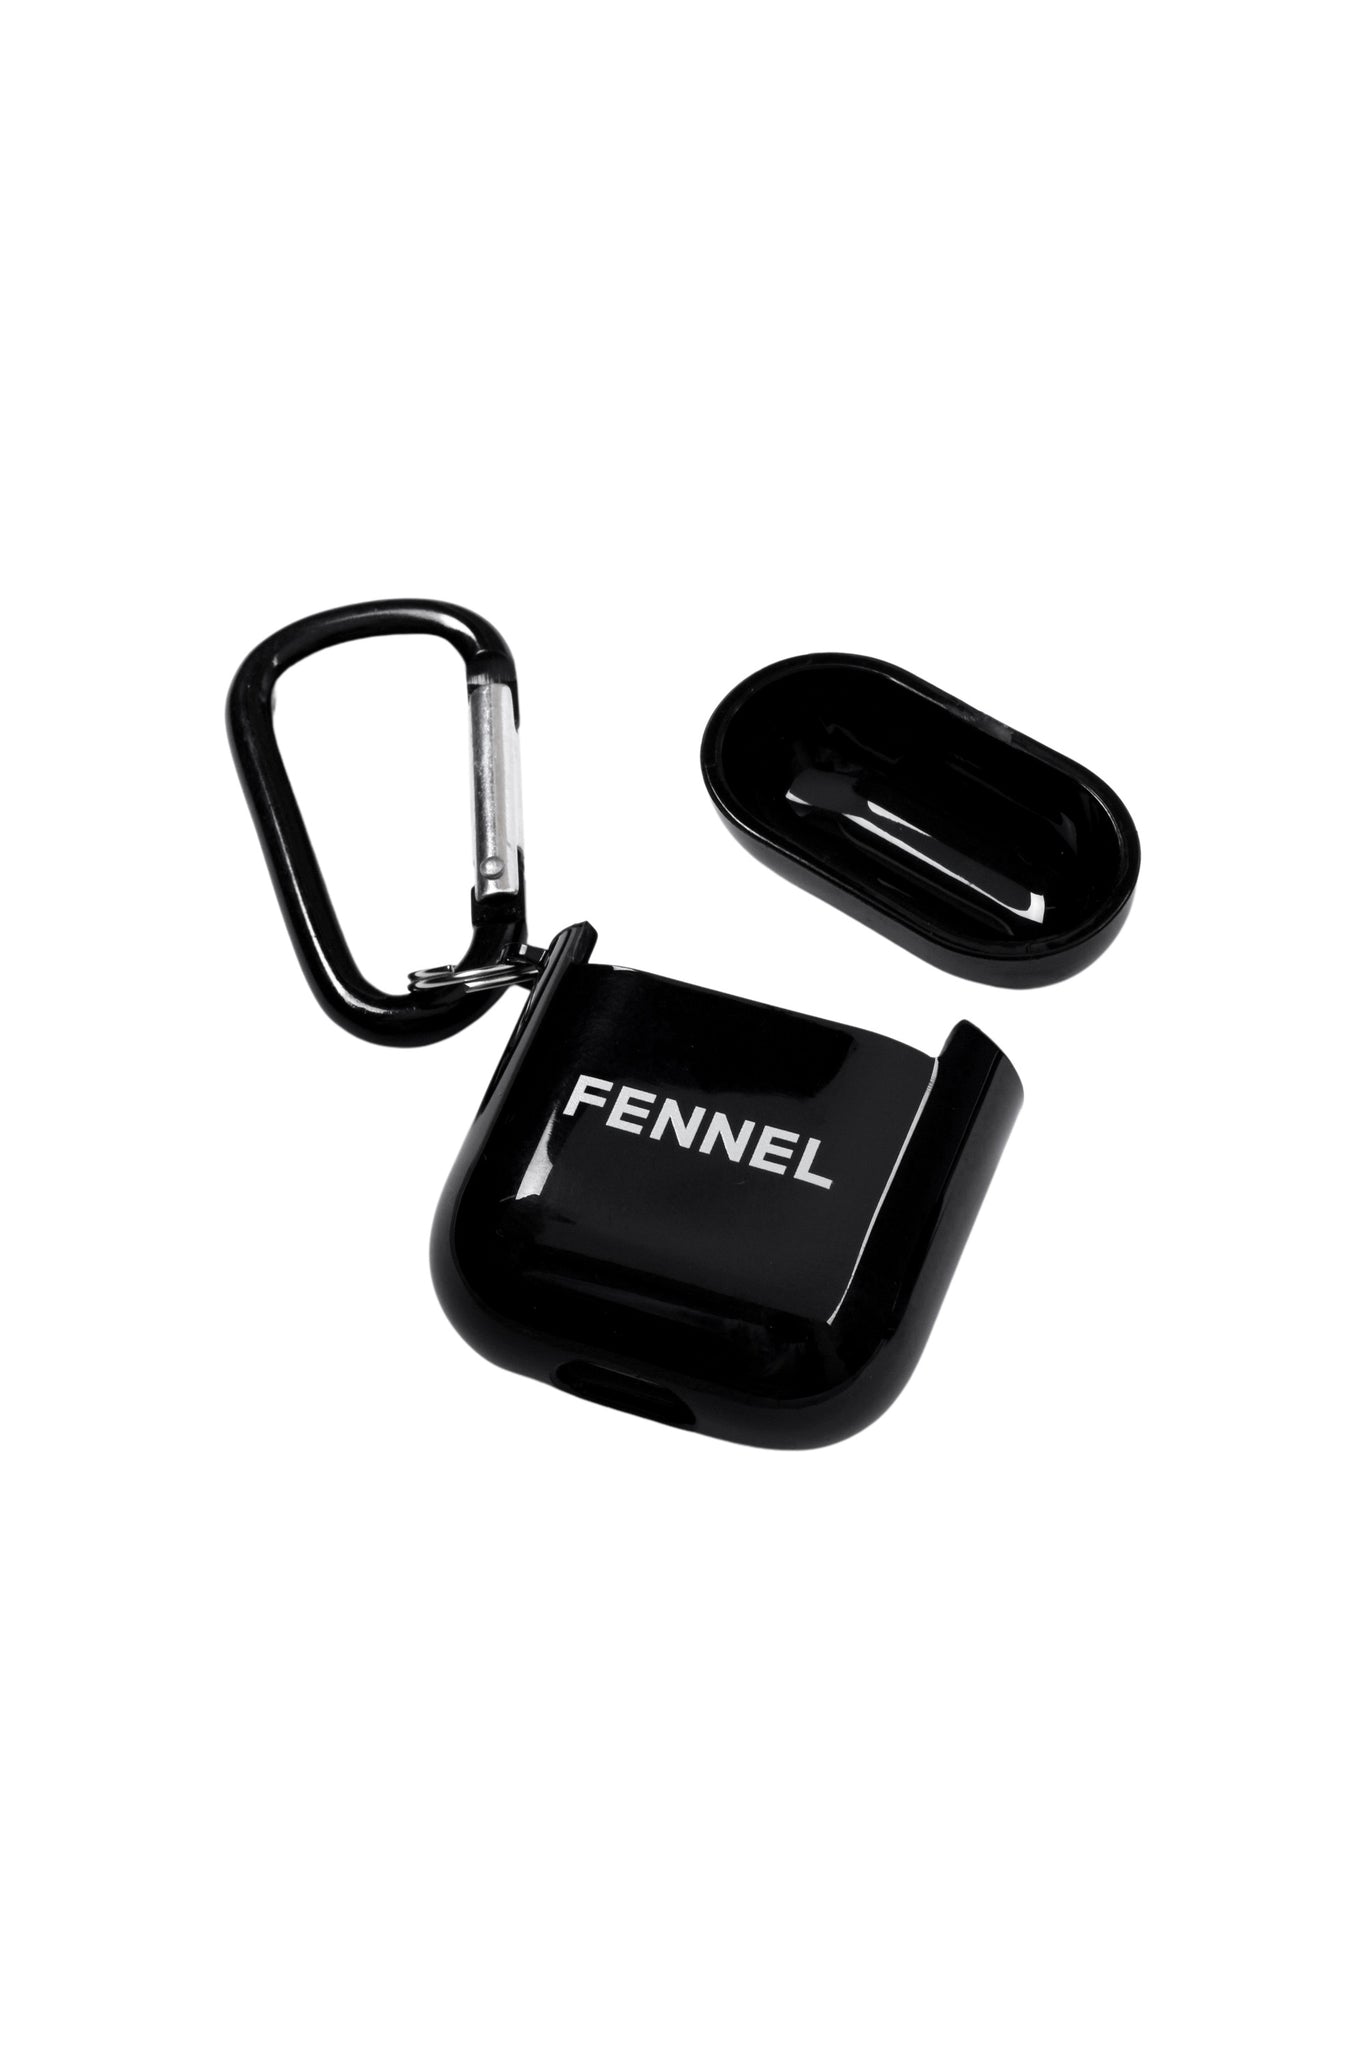 FENNEL LOGO AirPods case / AirPods Pro case